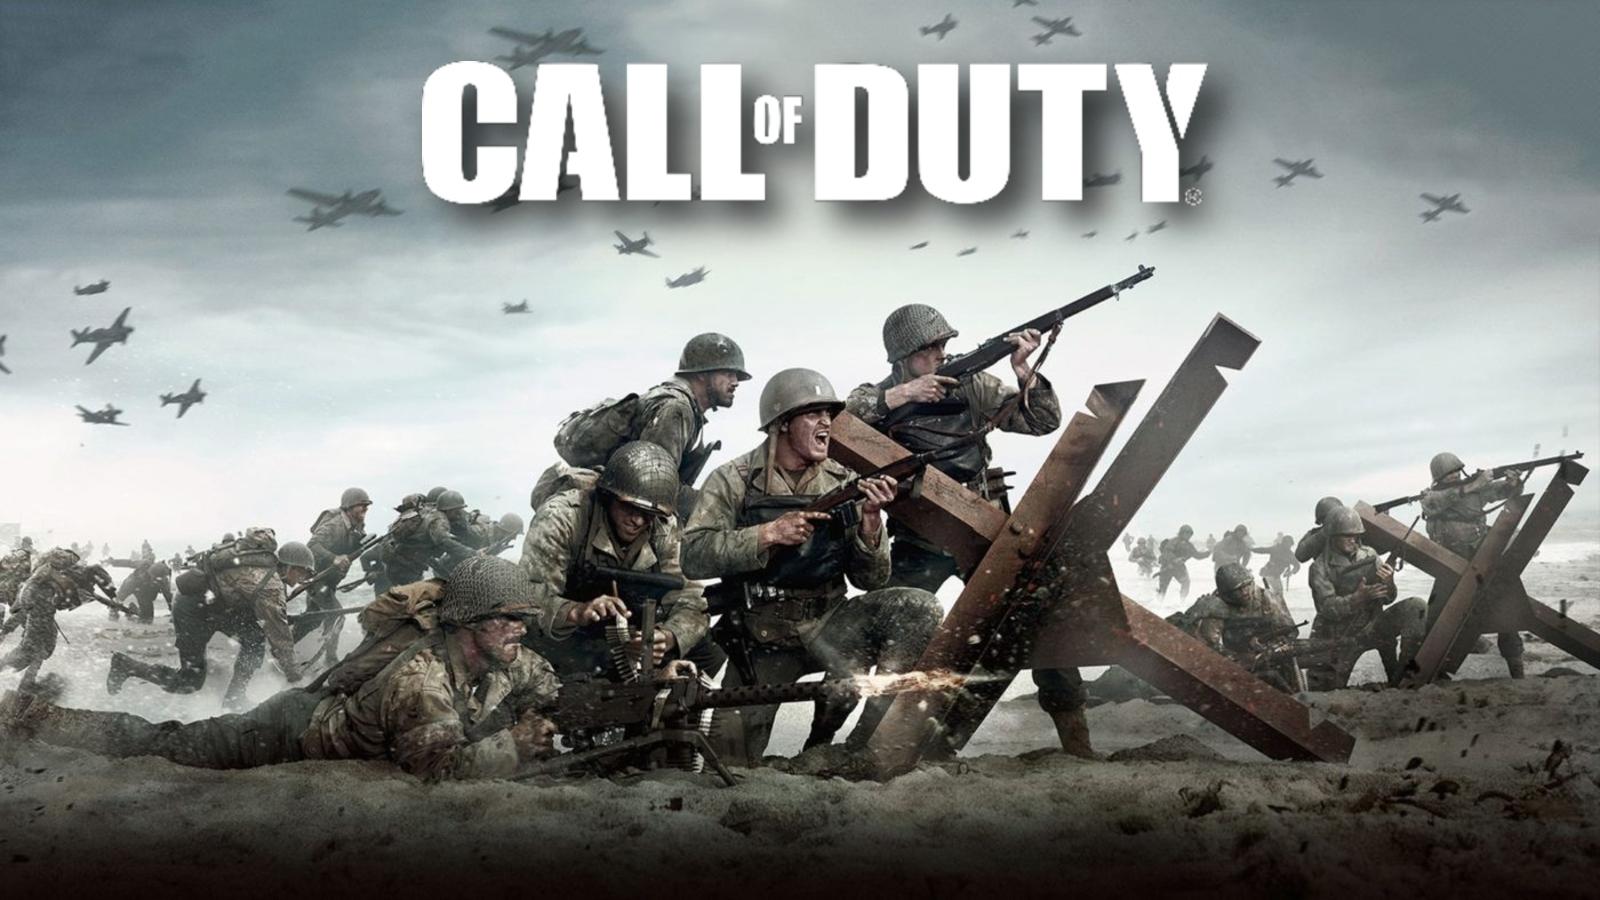 Topic · Call of duty wwii ·